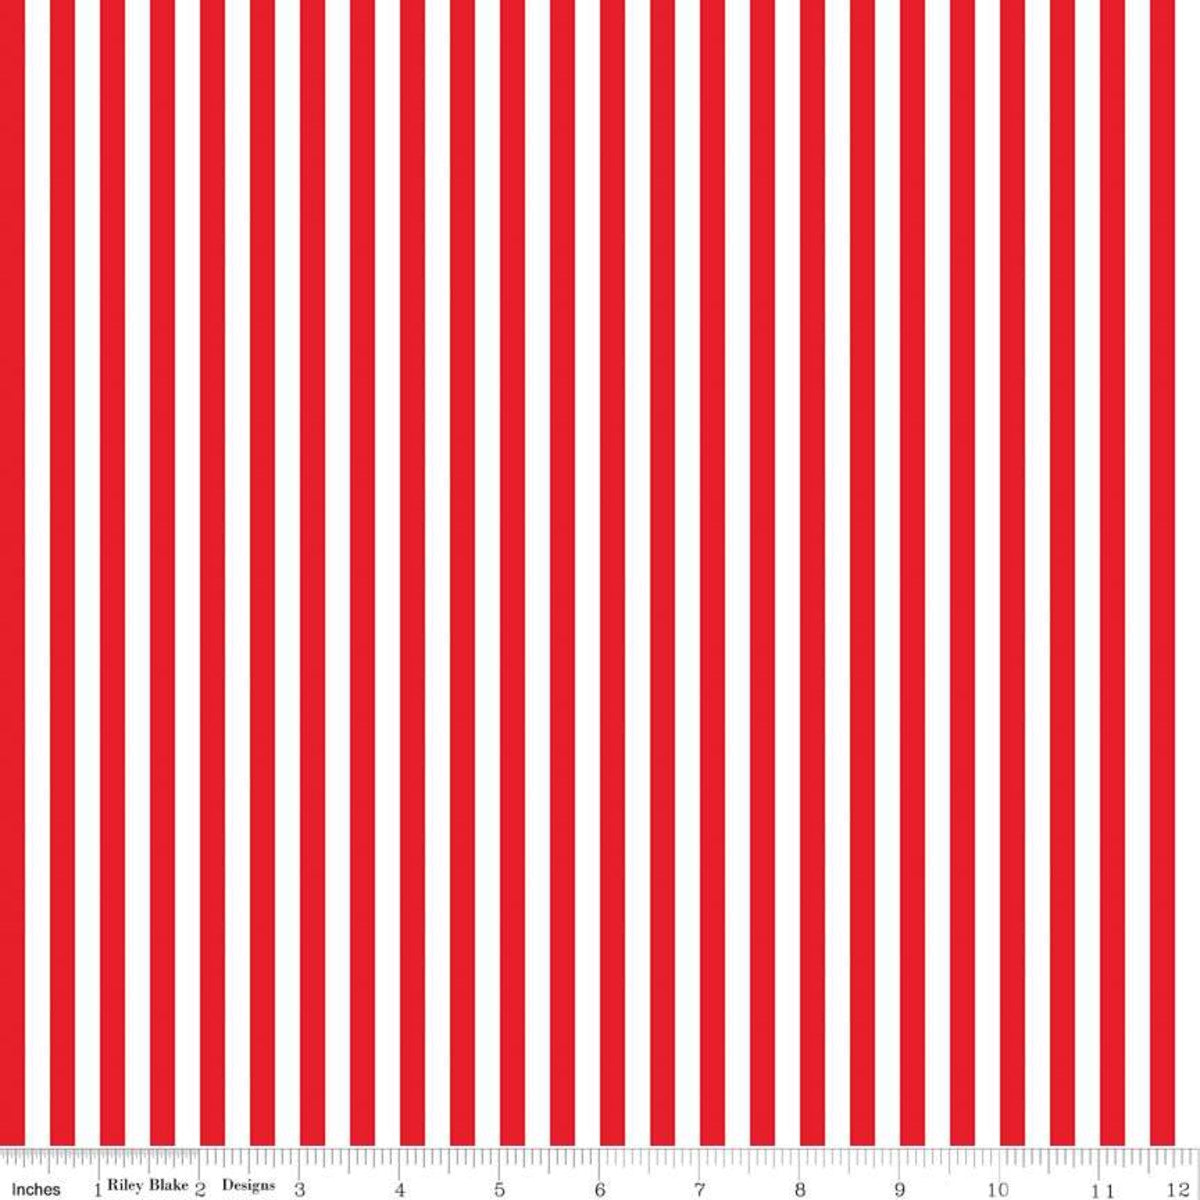 Fabric - 1/4 Inch Stripe - Red and White